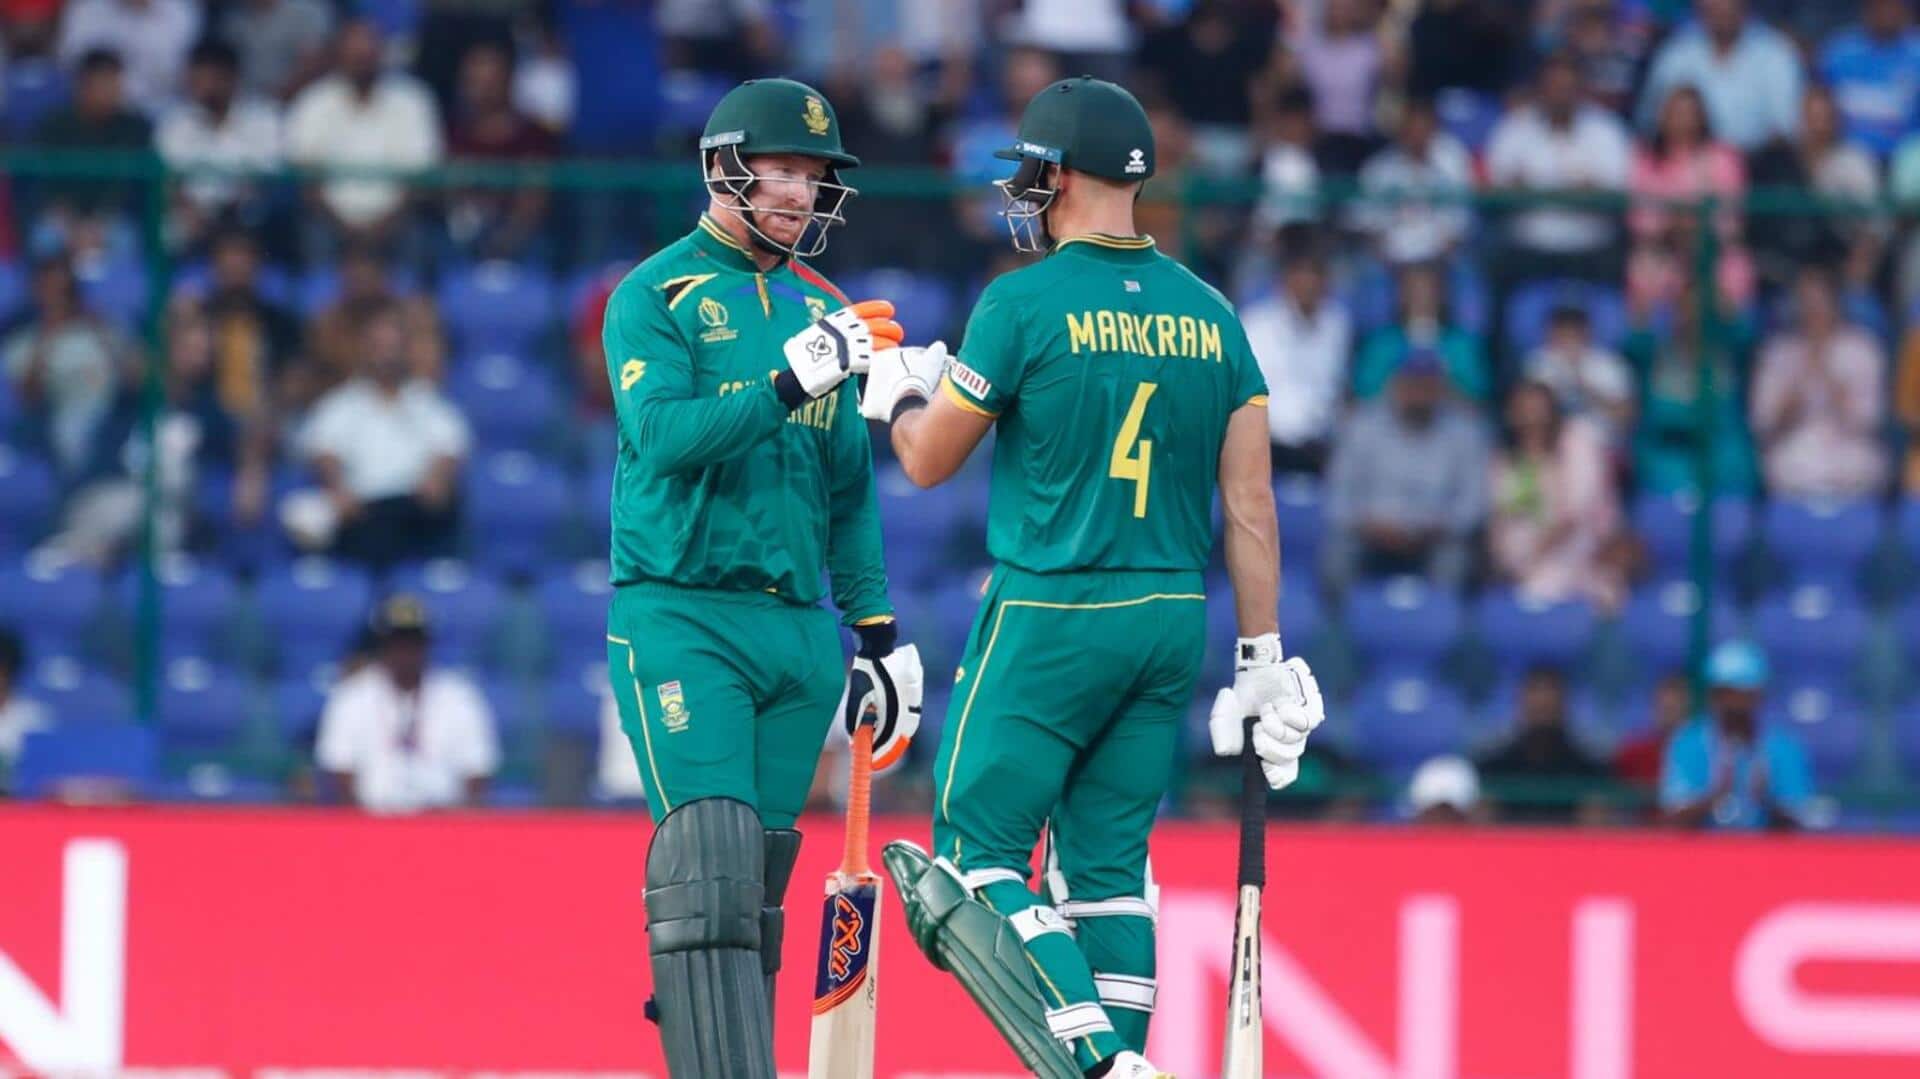 ICC Cricket World Cup: High-flying South Africa up against Netherlands